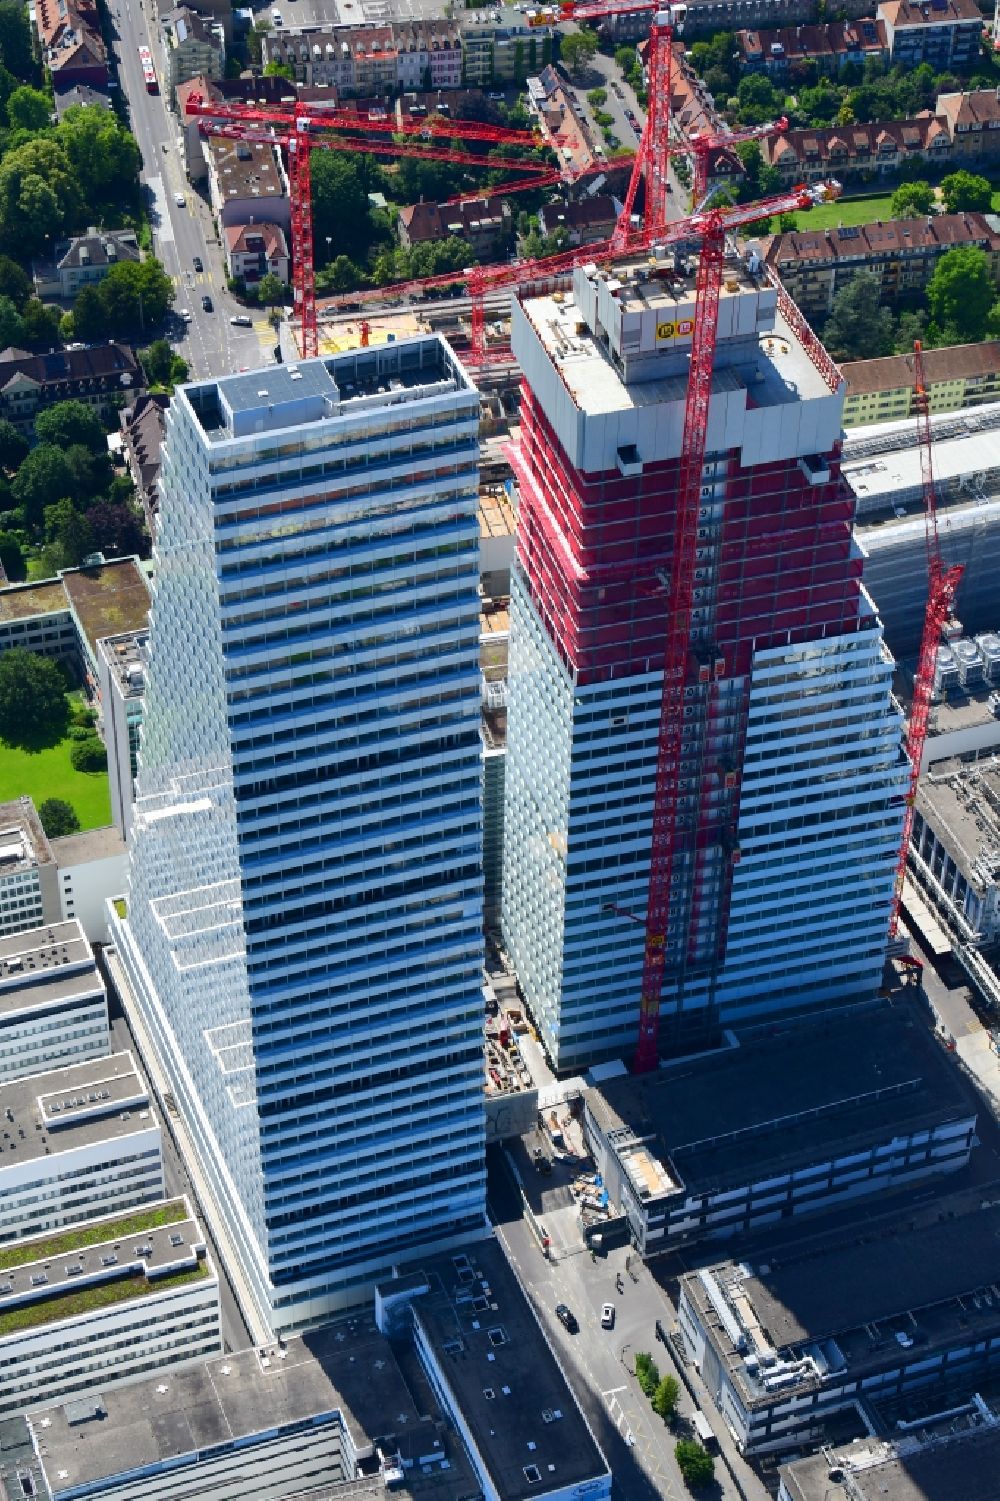 Aerial photograph Basel - Extension construction sites on the premises of the pharmaceutical company Roche with the cityscape-defining high-rise building in Basel in Switzerland. Construction works for the second tower are visible